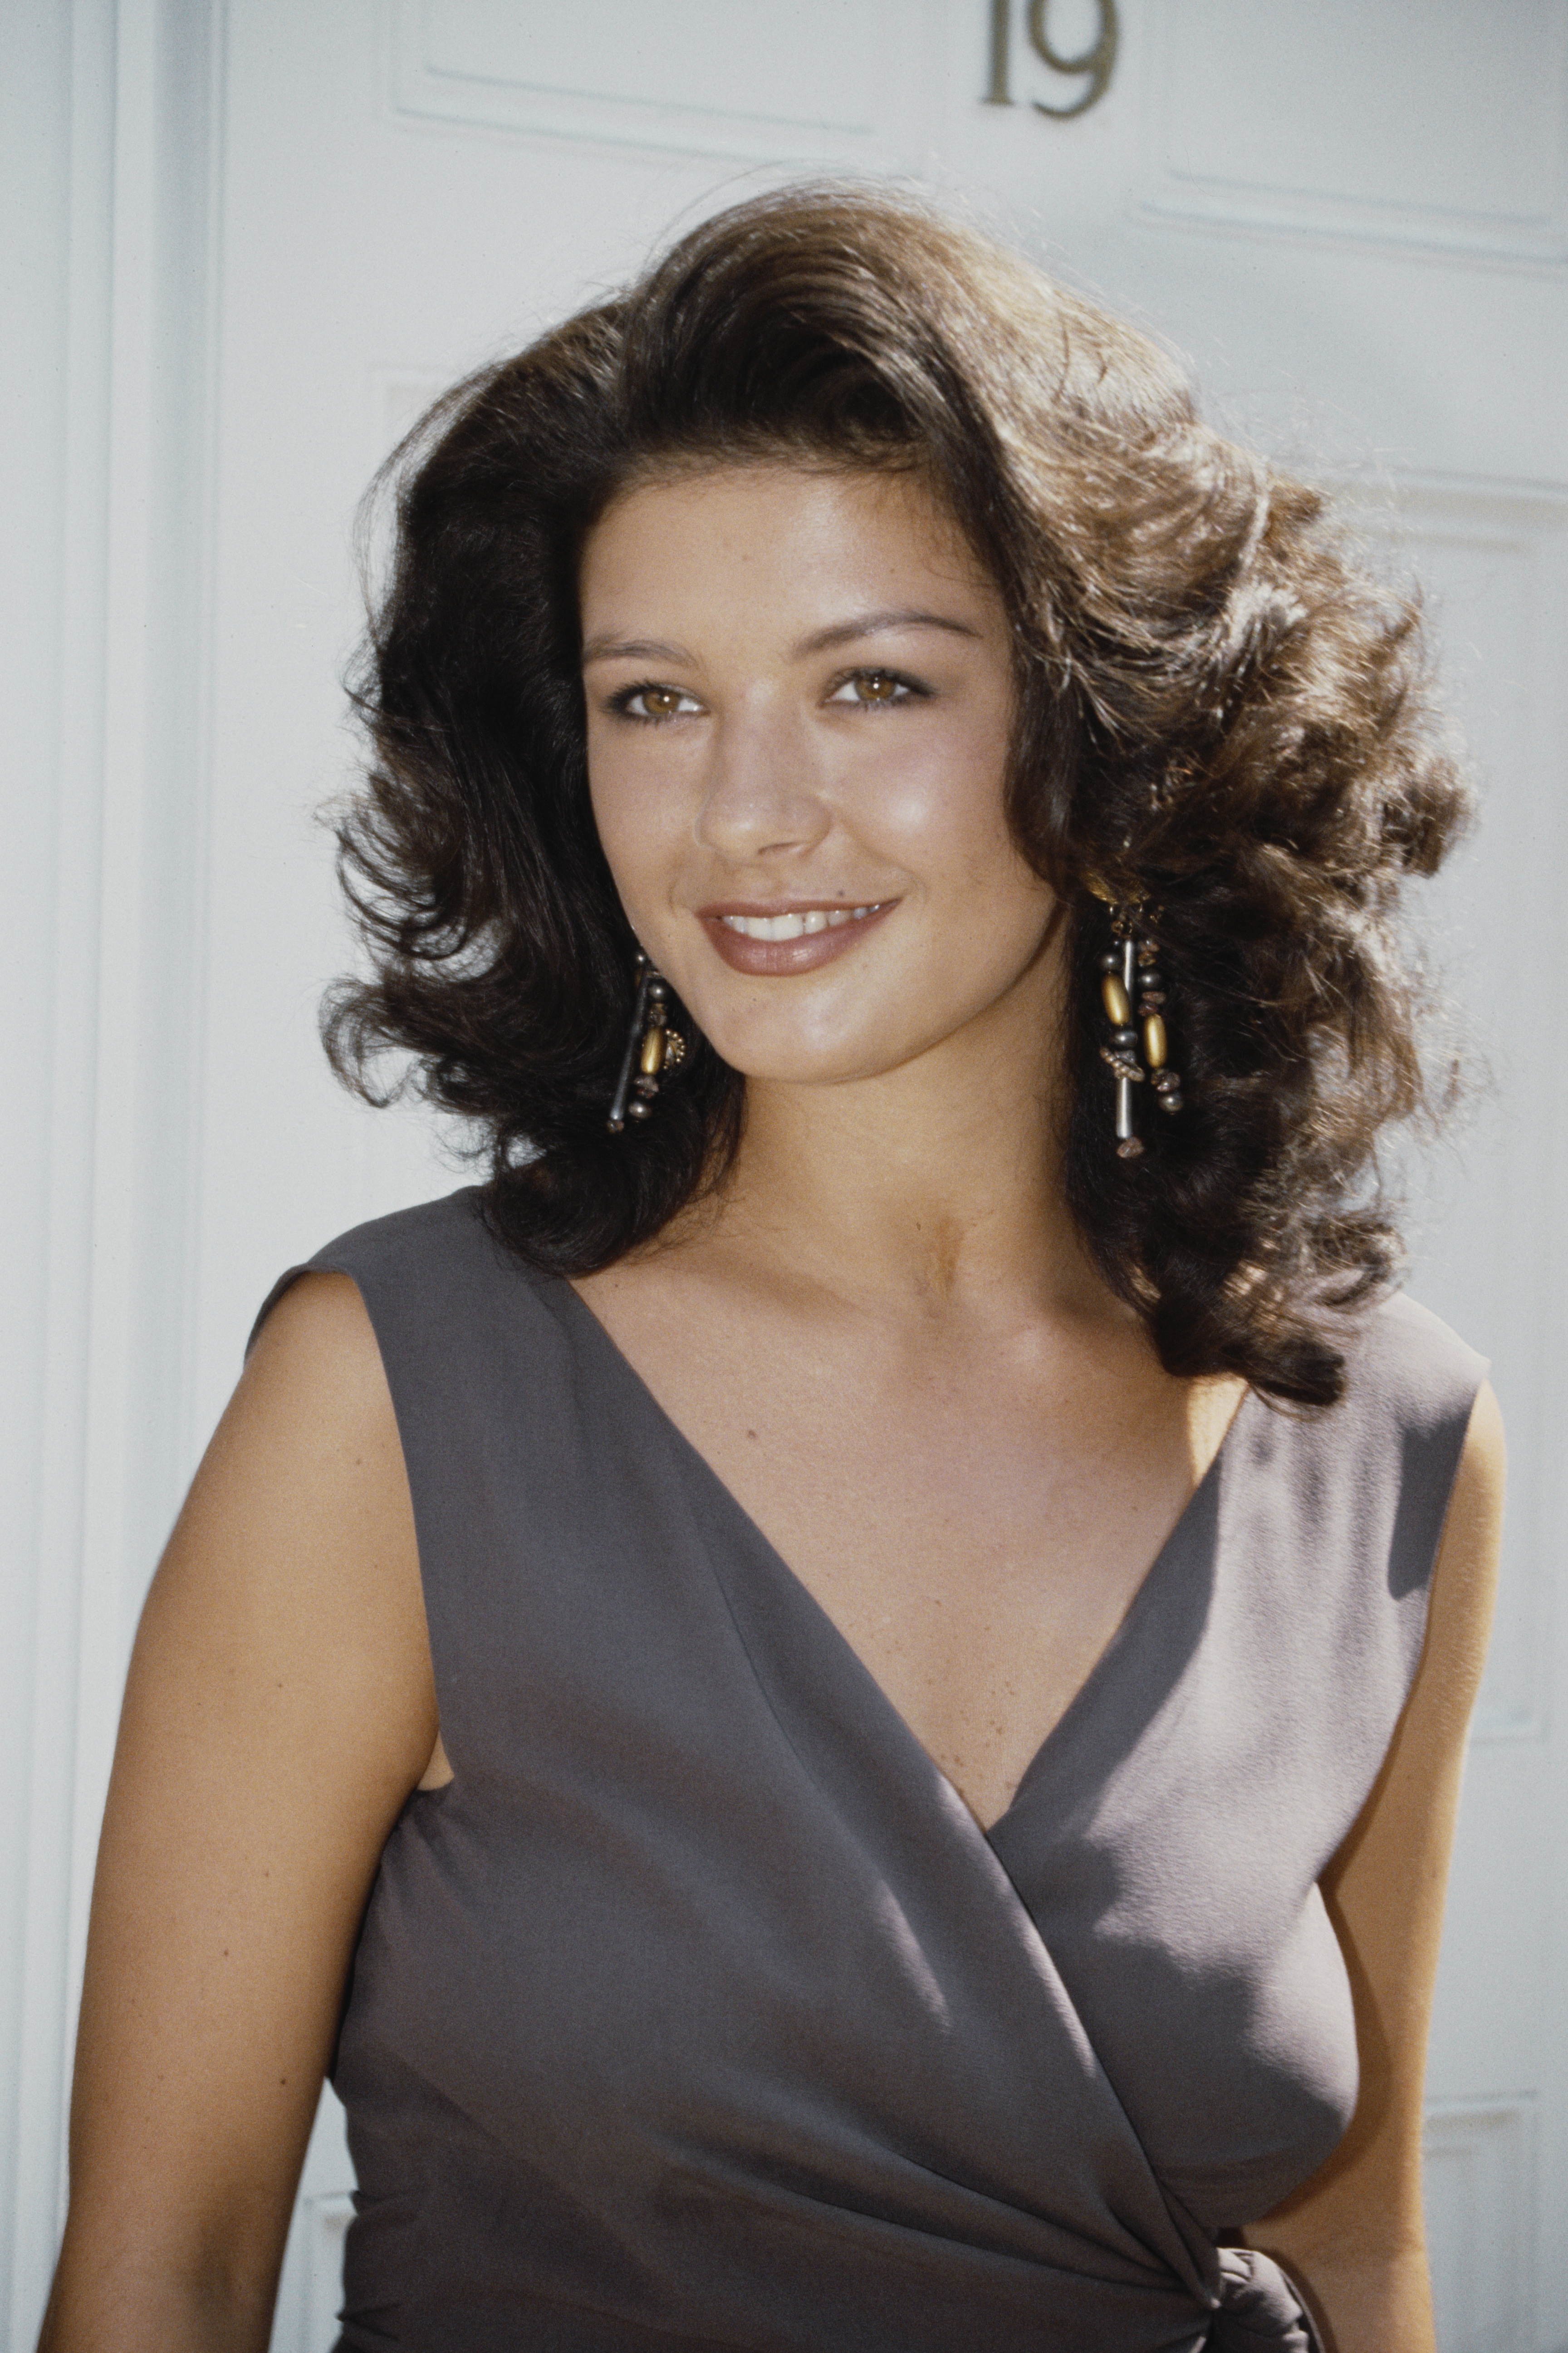 Welsh actress Catherine Zeta-Jones, who plays the role of Mariette in the television drama series "The Darling Buds of May," pictured circa 1991. | Source: Getty Images